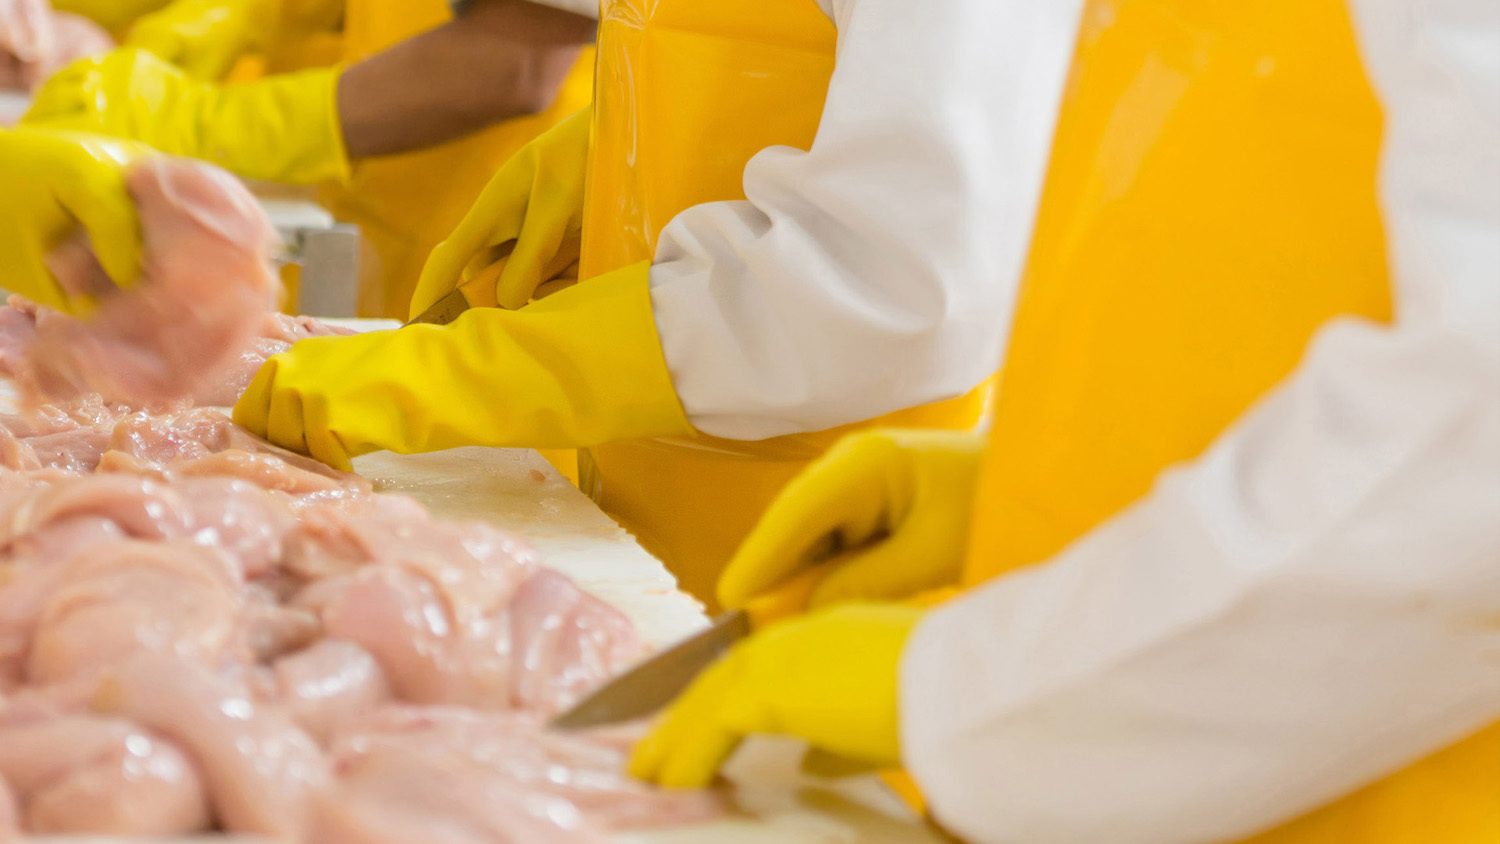 Poultry plant workers cut meat wearing yellow gloves and aprons. February 2021